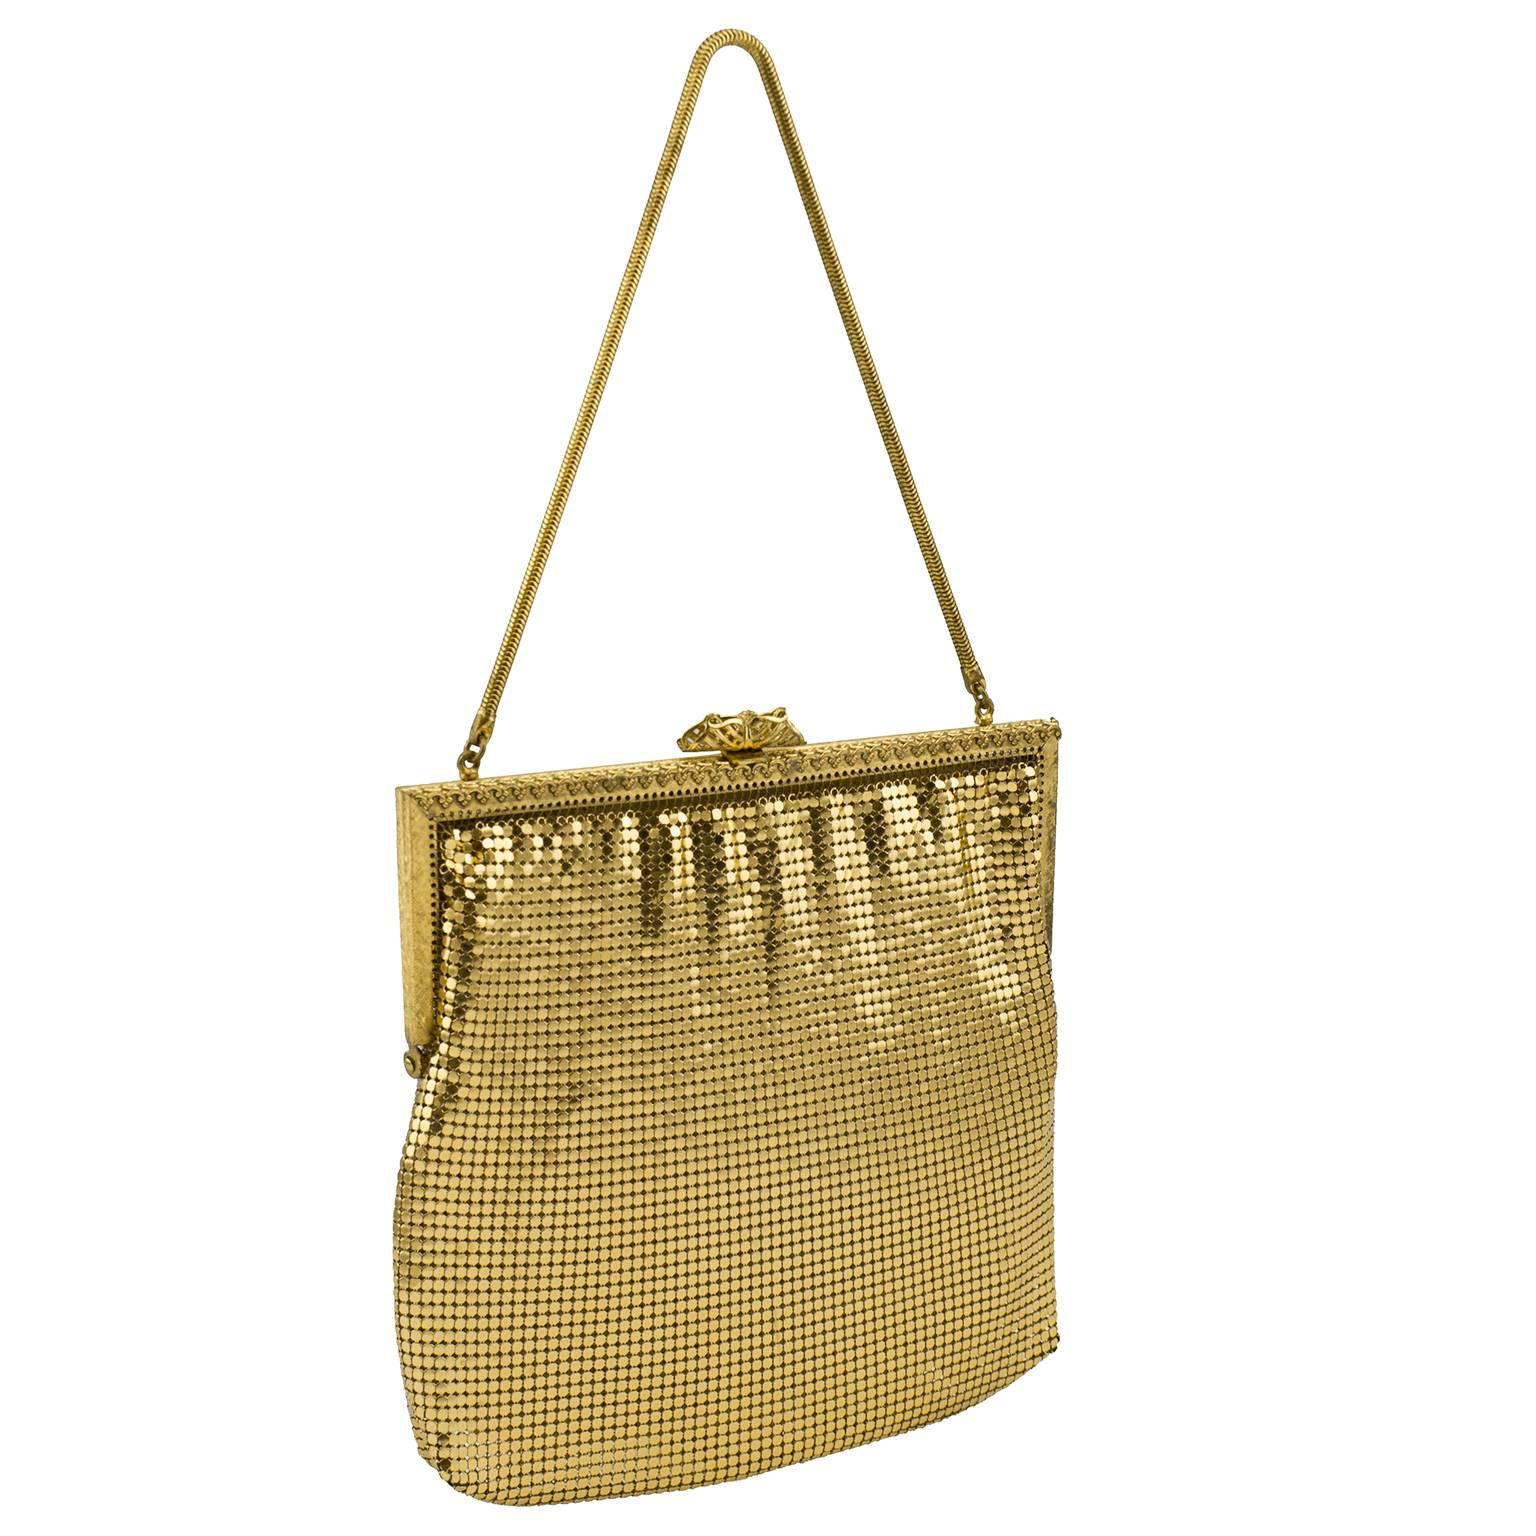 Classic and beautiful 1950s gold metal mesh evening bag. Details are amazing throughout, gold metal frame with ornate metal work and filigree snap clasp. Peach silk lining. Excellent vintage condition, slight wear to lining. 

Length 7